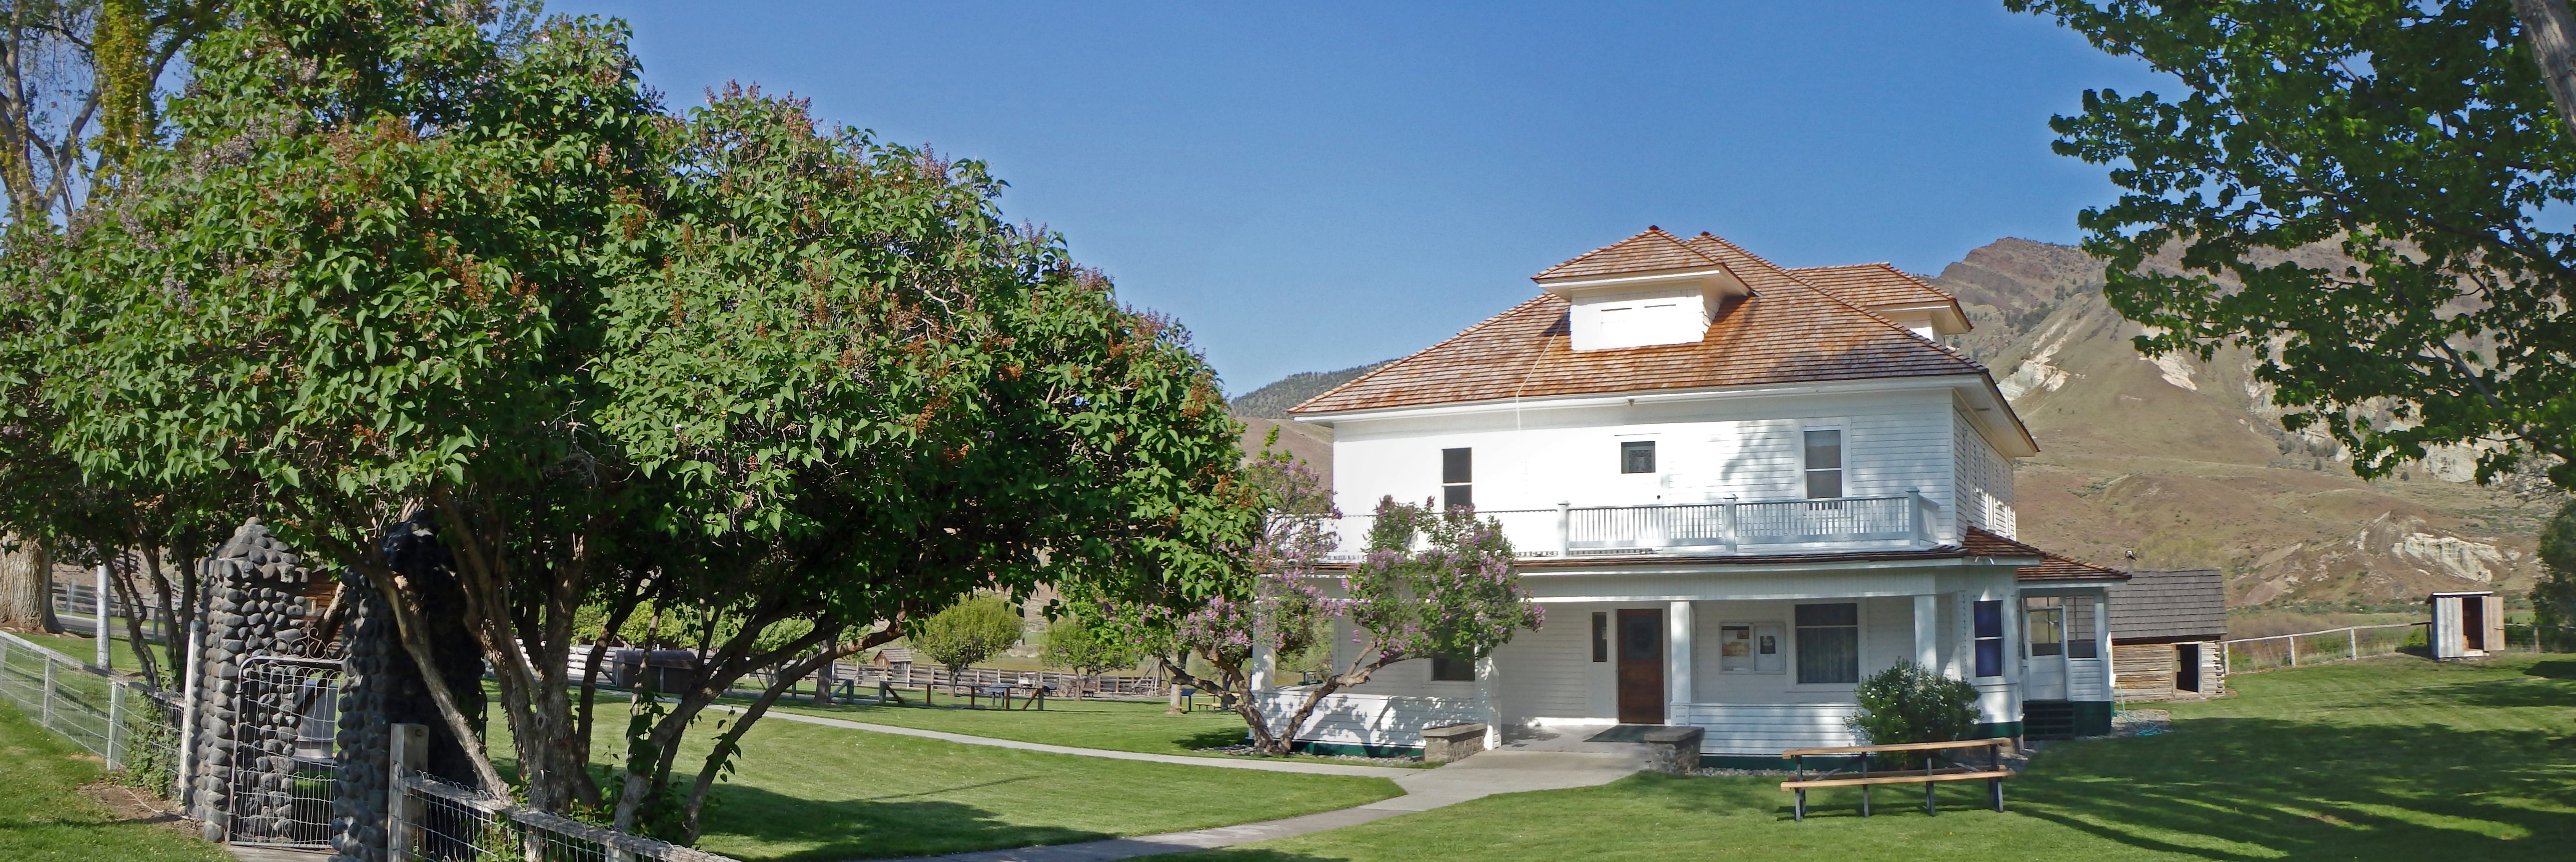 A three-story white building with wrap around porch sits on a green lawn on a sunny spring day. The lilac trees is in bloom with violet flowers.